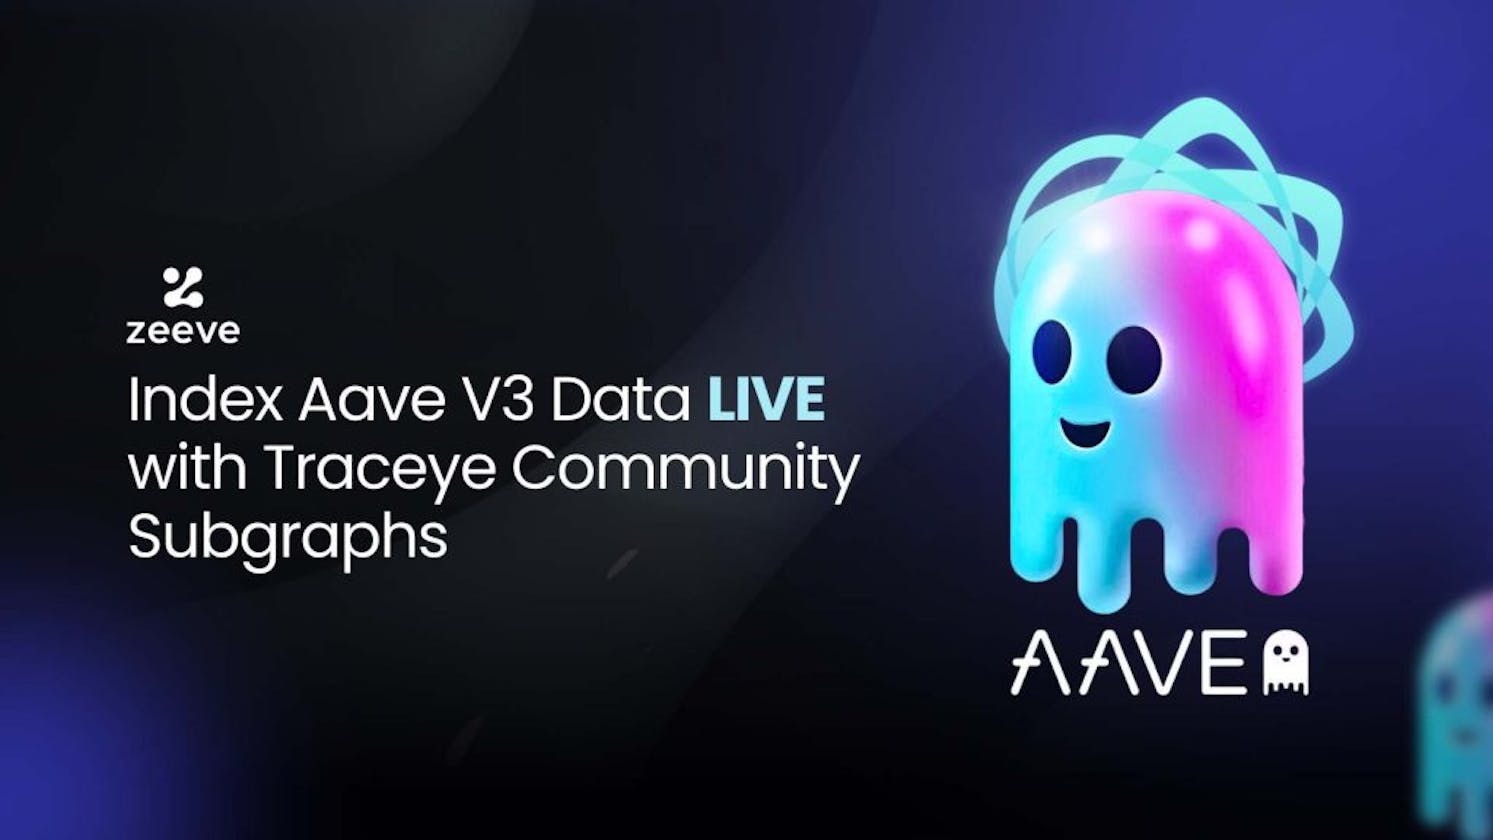 Index Aave V3 Data LIVE with Traceye Community Subgraphs